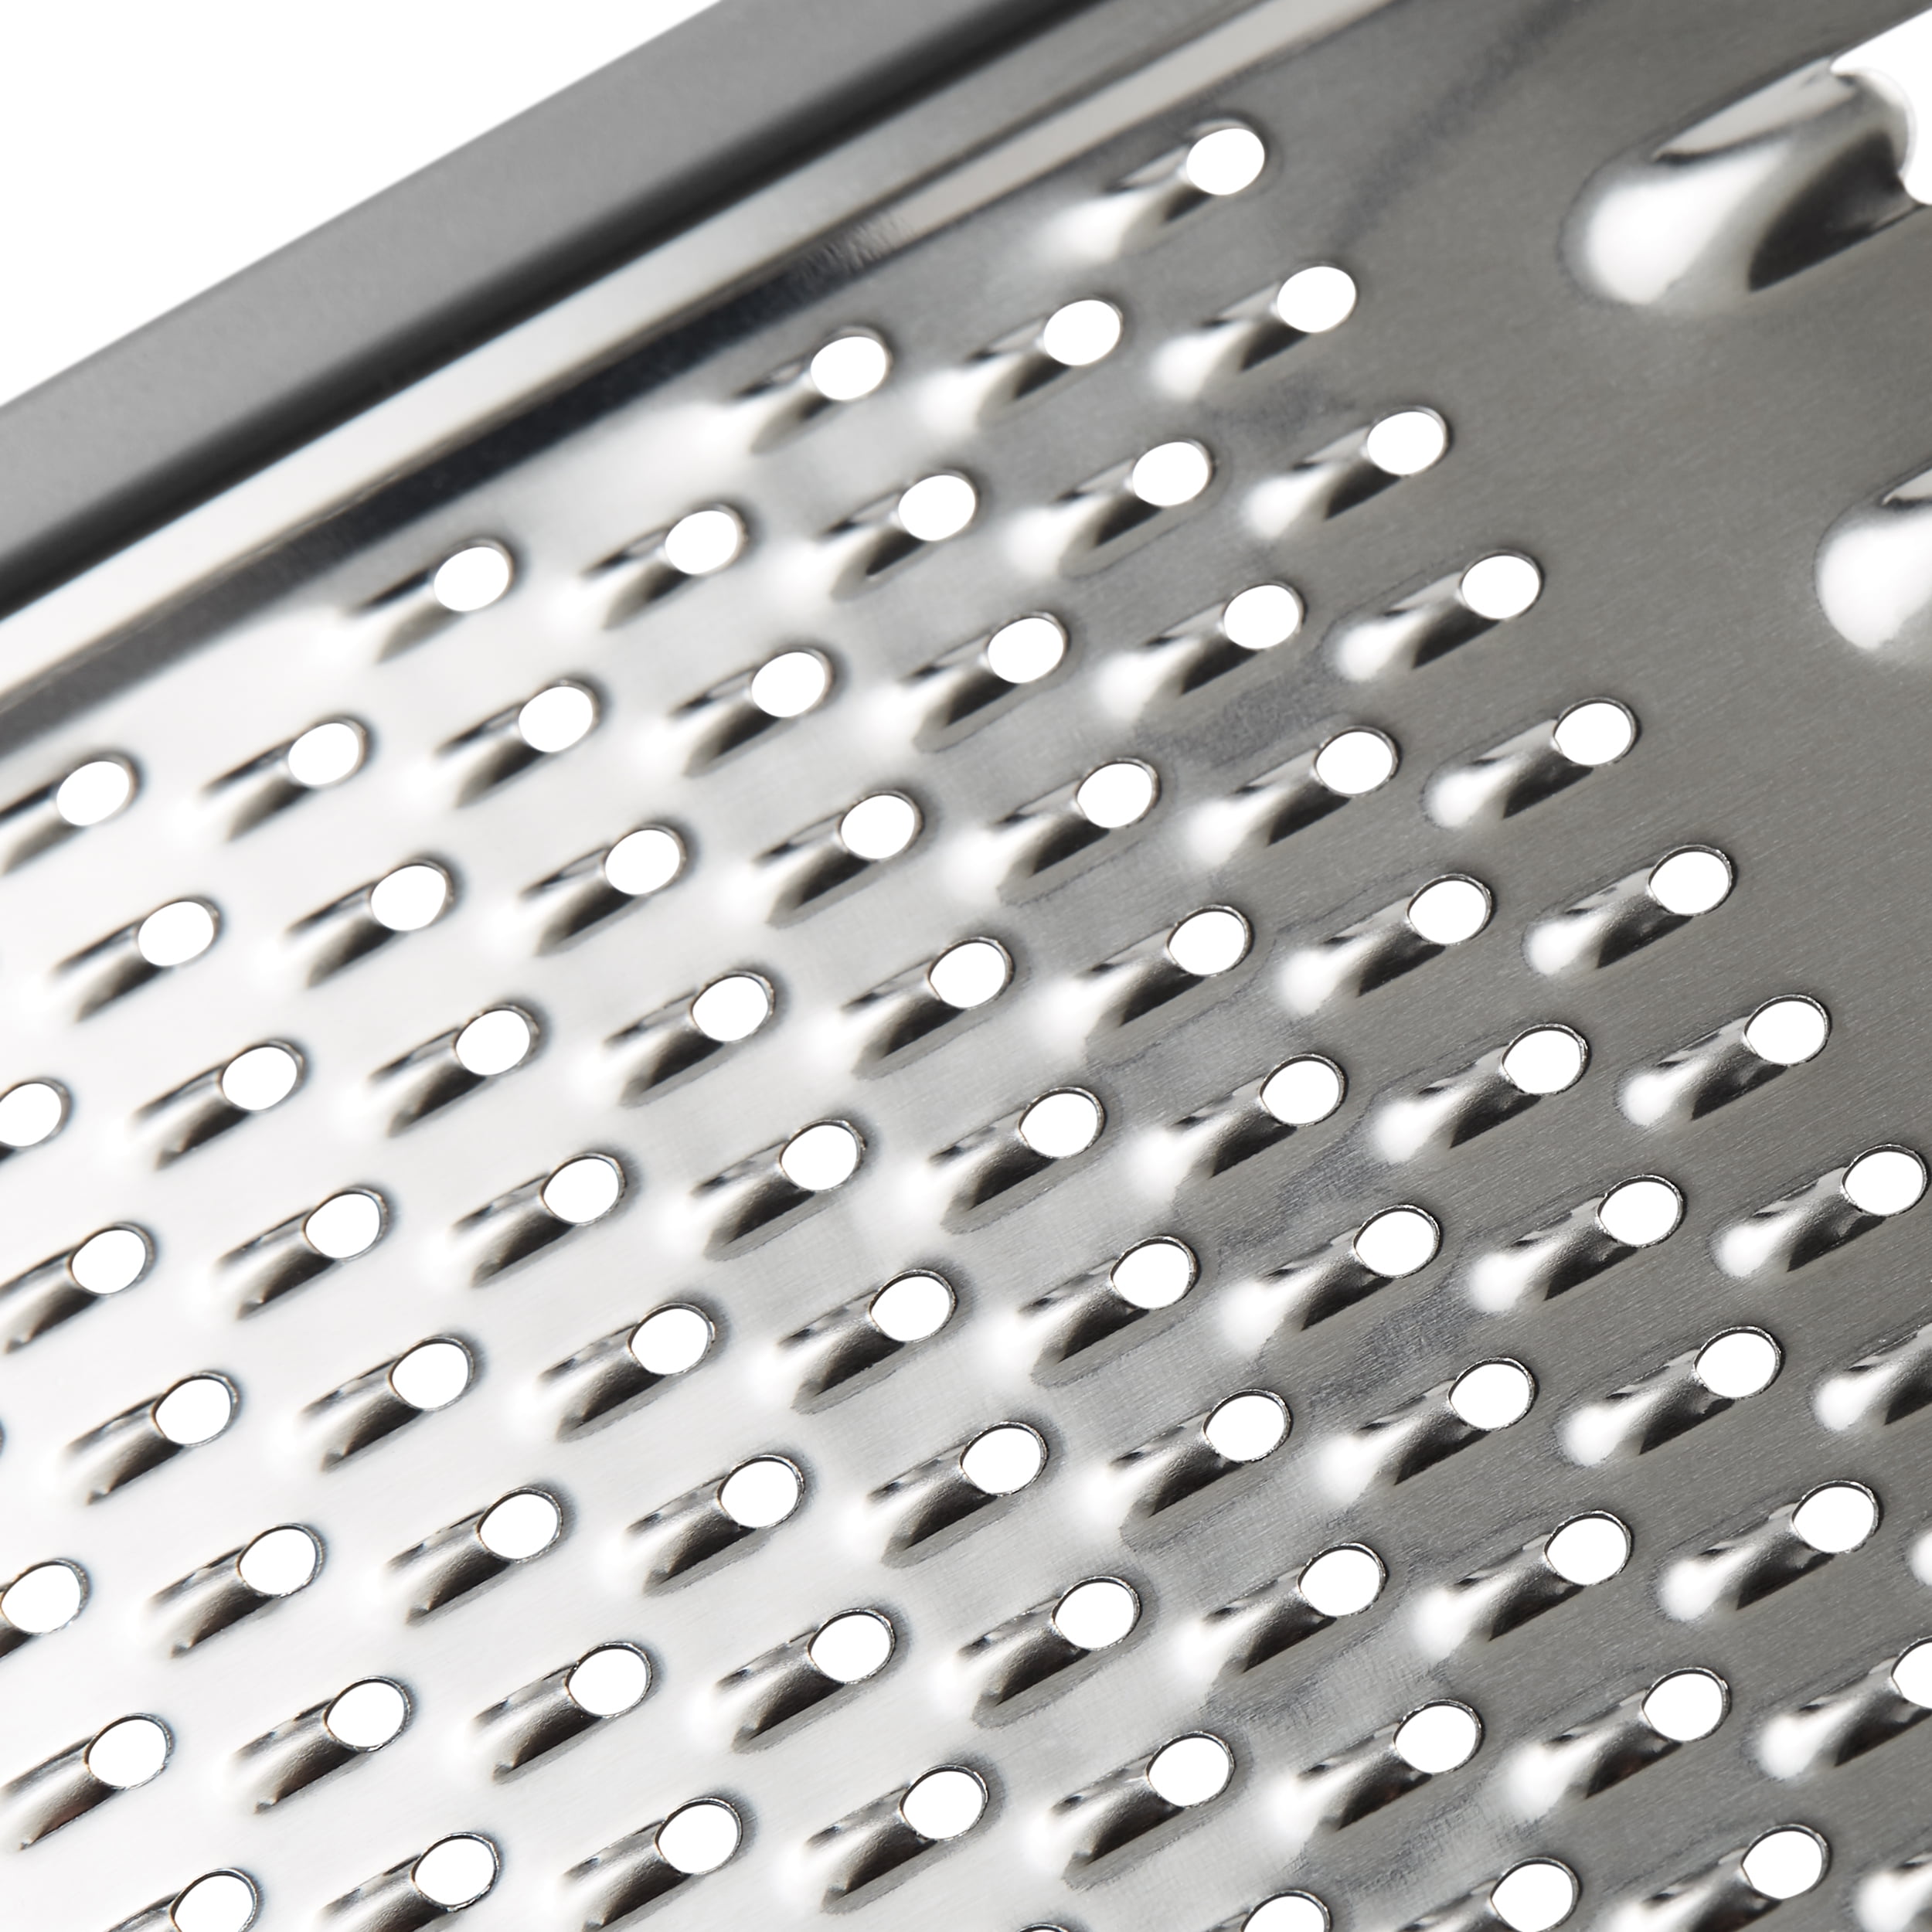 Mainstays Stainless Steel Dual-Section Flat Cheese Grater, Gray 